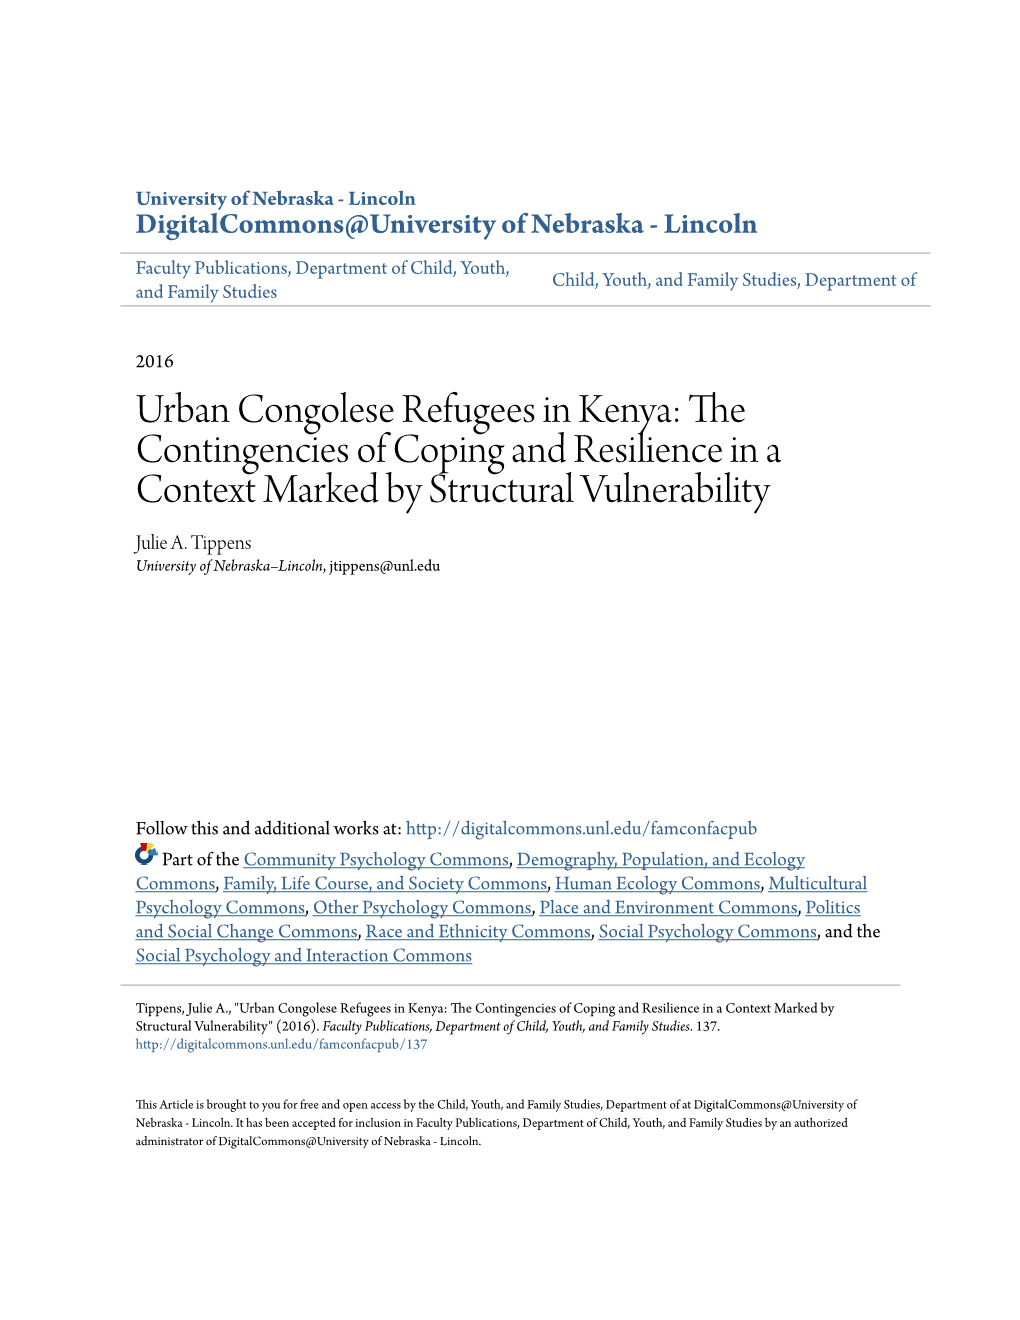 Urban Congolese Refugees in Kenya: the Contingencies of Coping and Resilience in a Context Marked by Structural Vulnerability Julie A